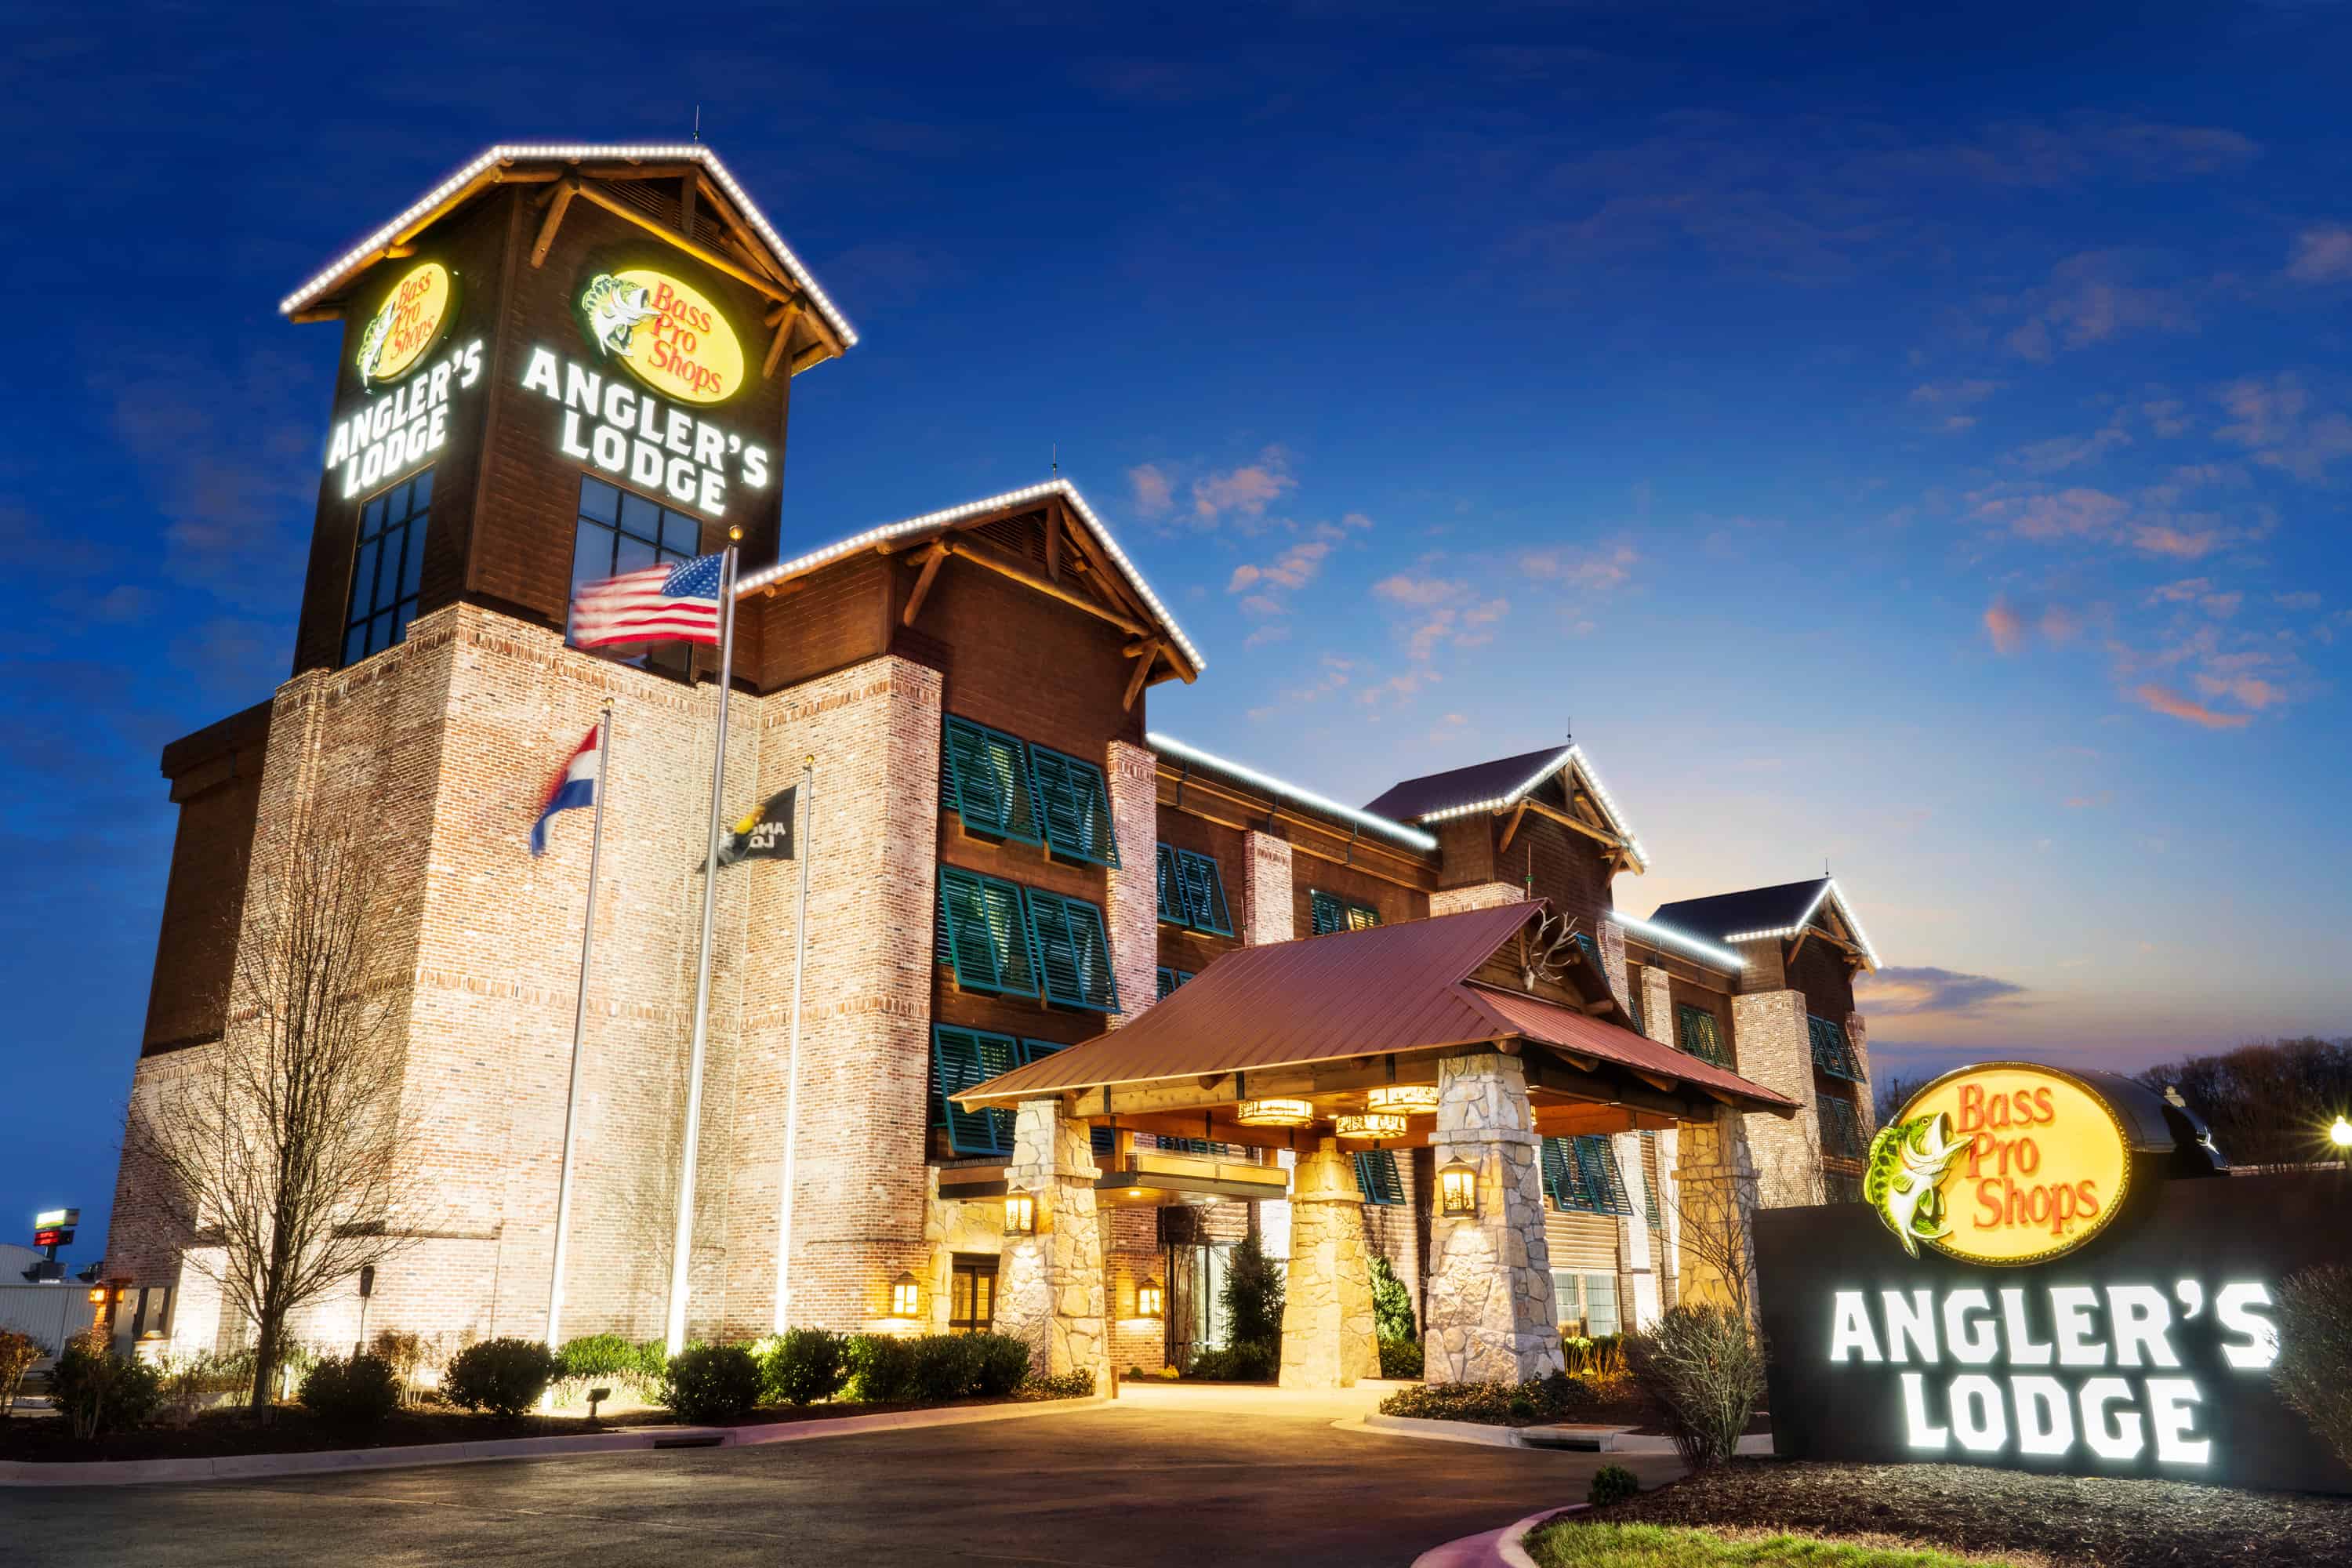 Bass Pro Shops Opens New Angler's Lodge in the Ozark Mountain